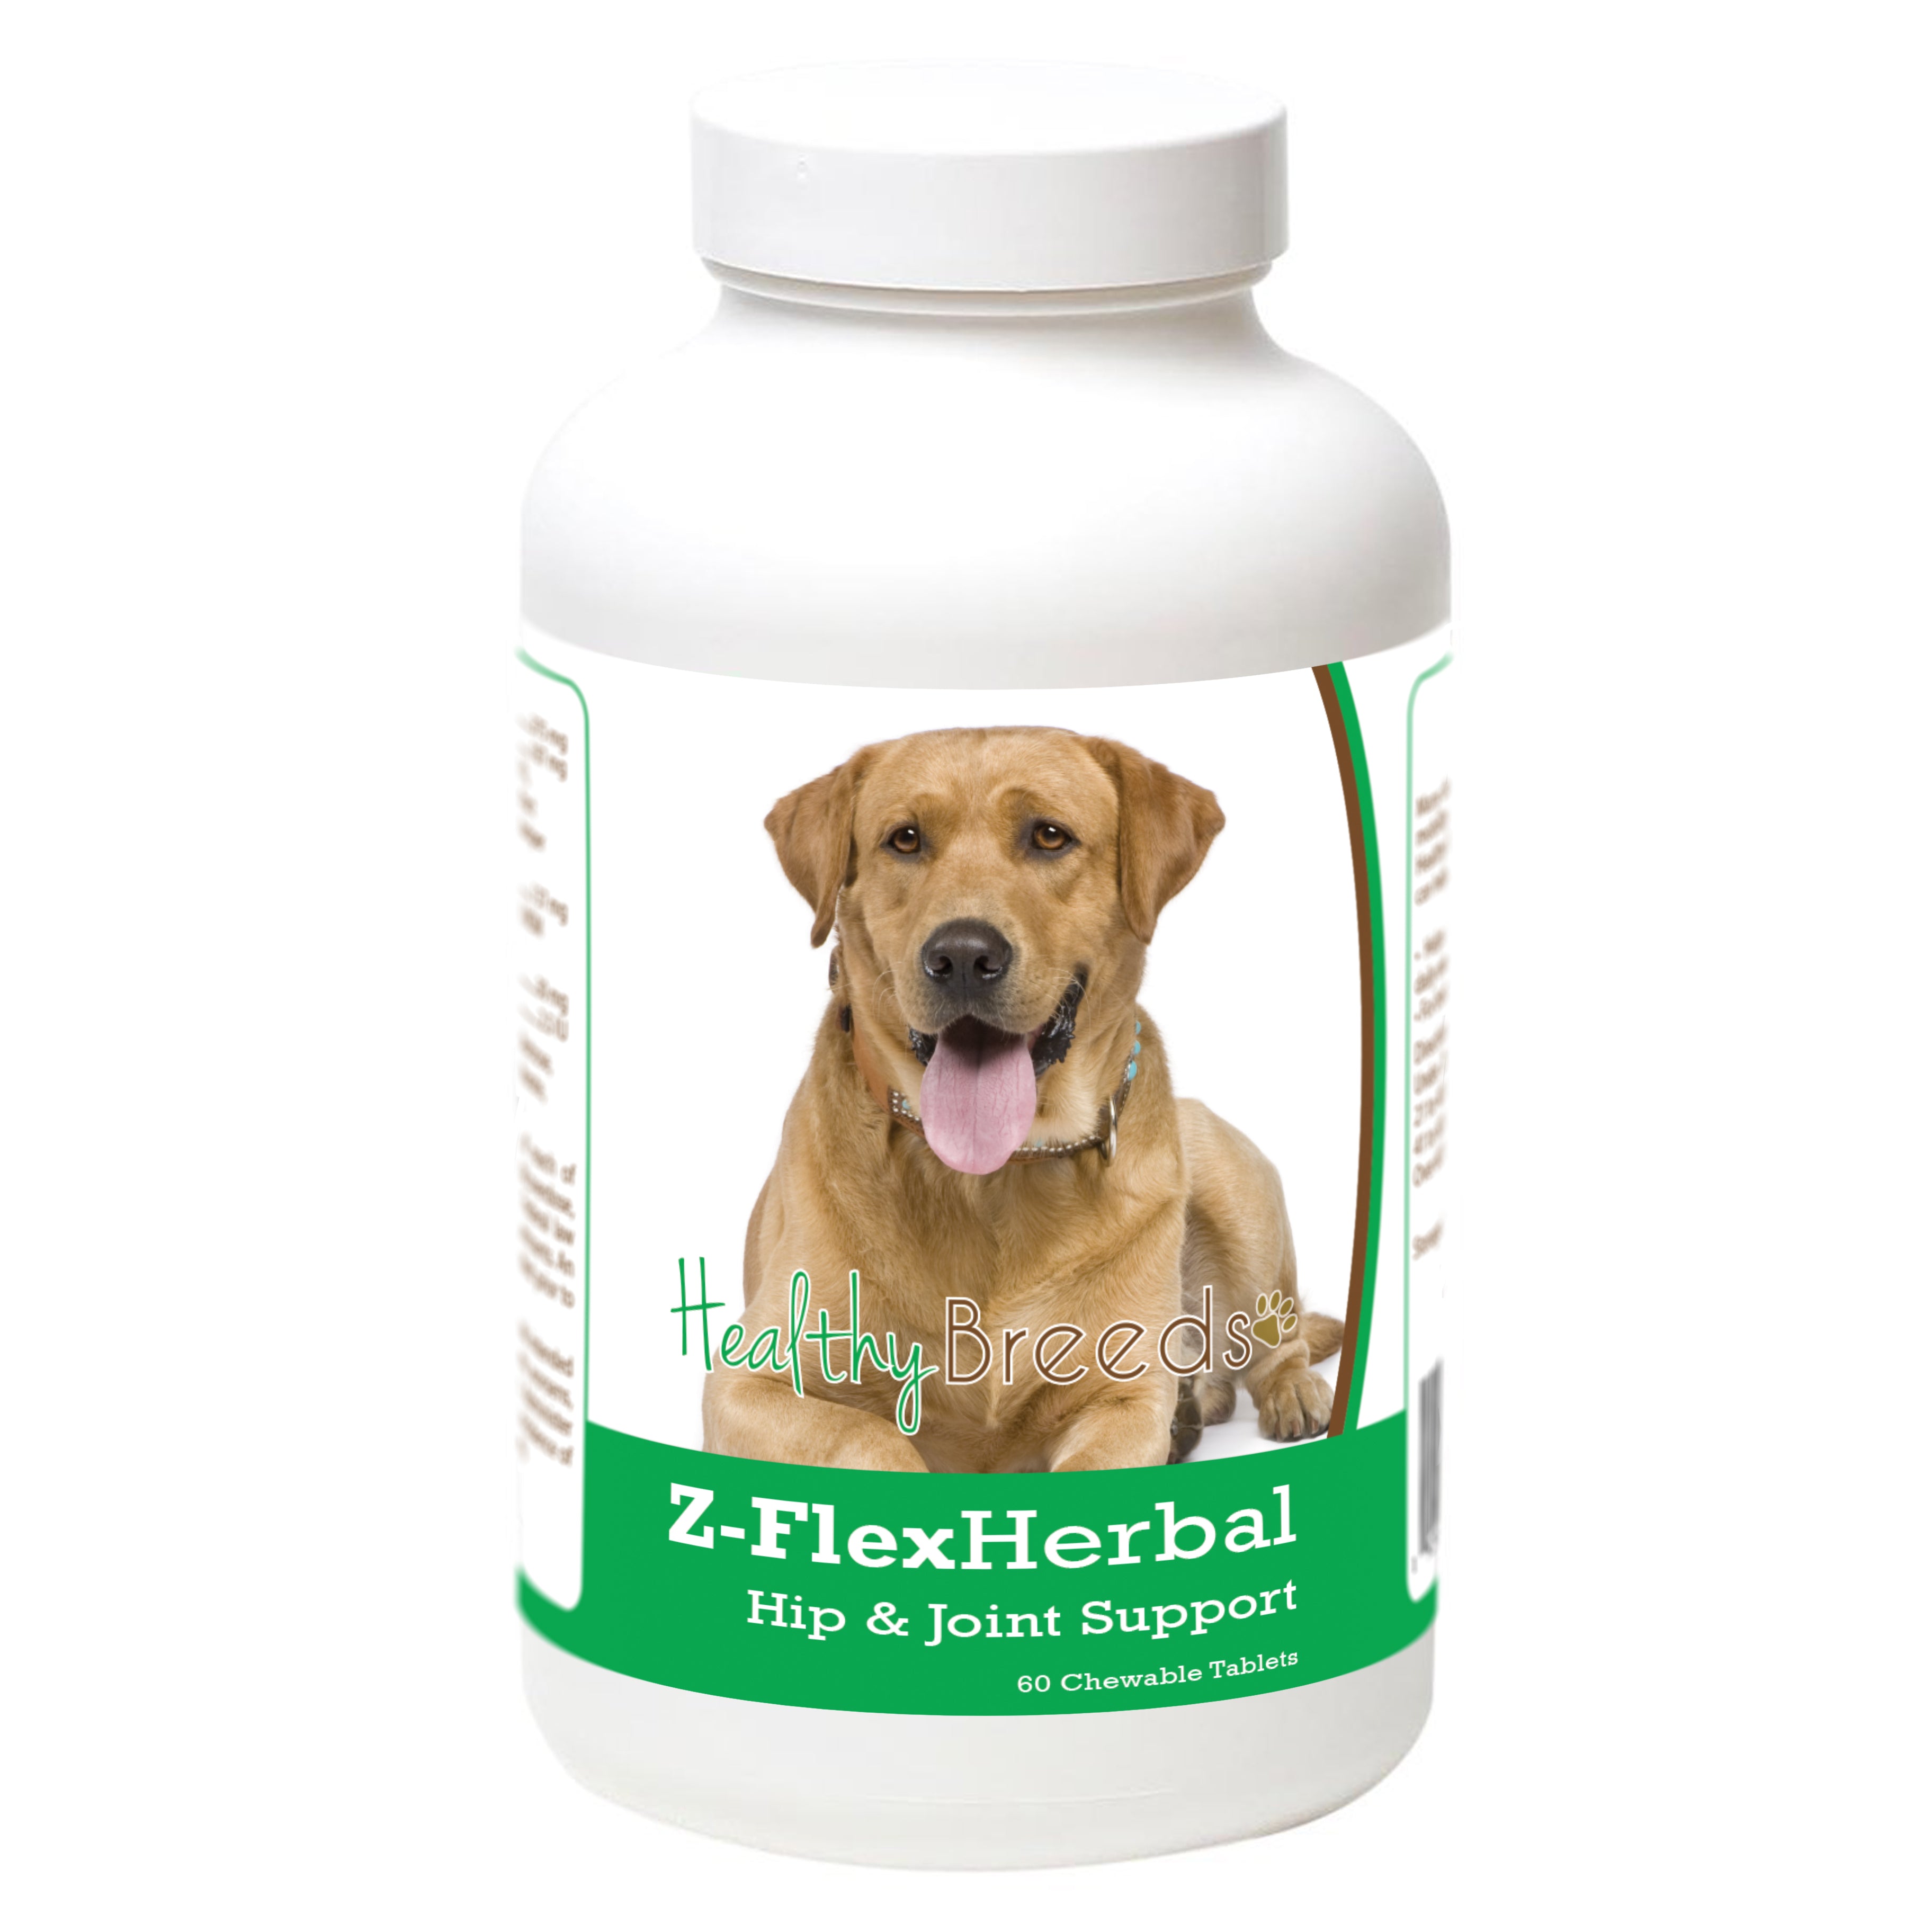 Labrador Retriever Natural Joint Support Chewable Tablets 60 Count